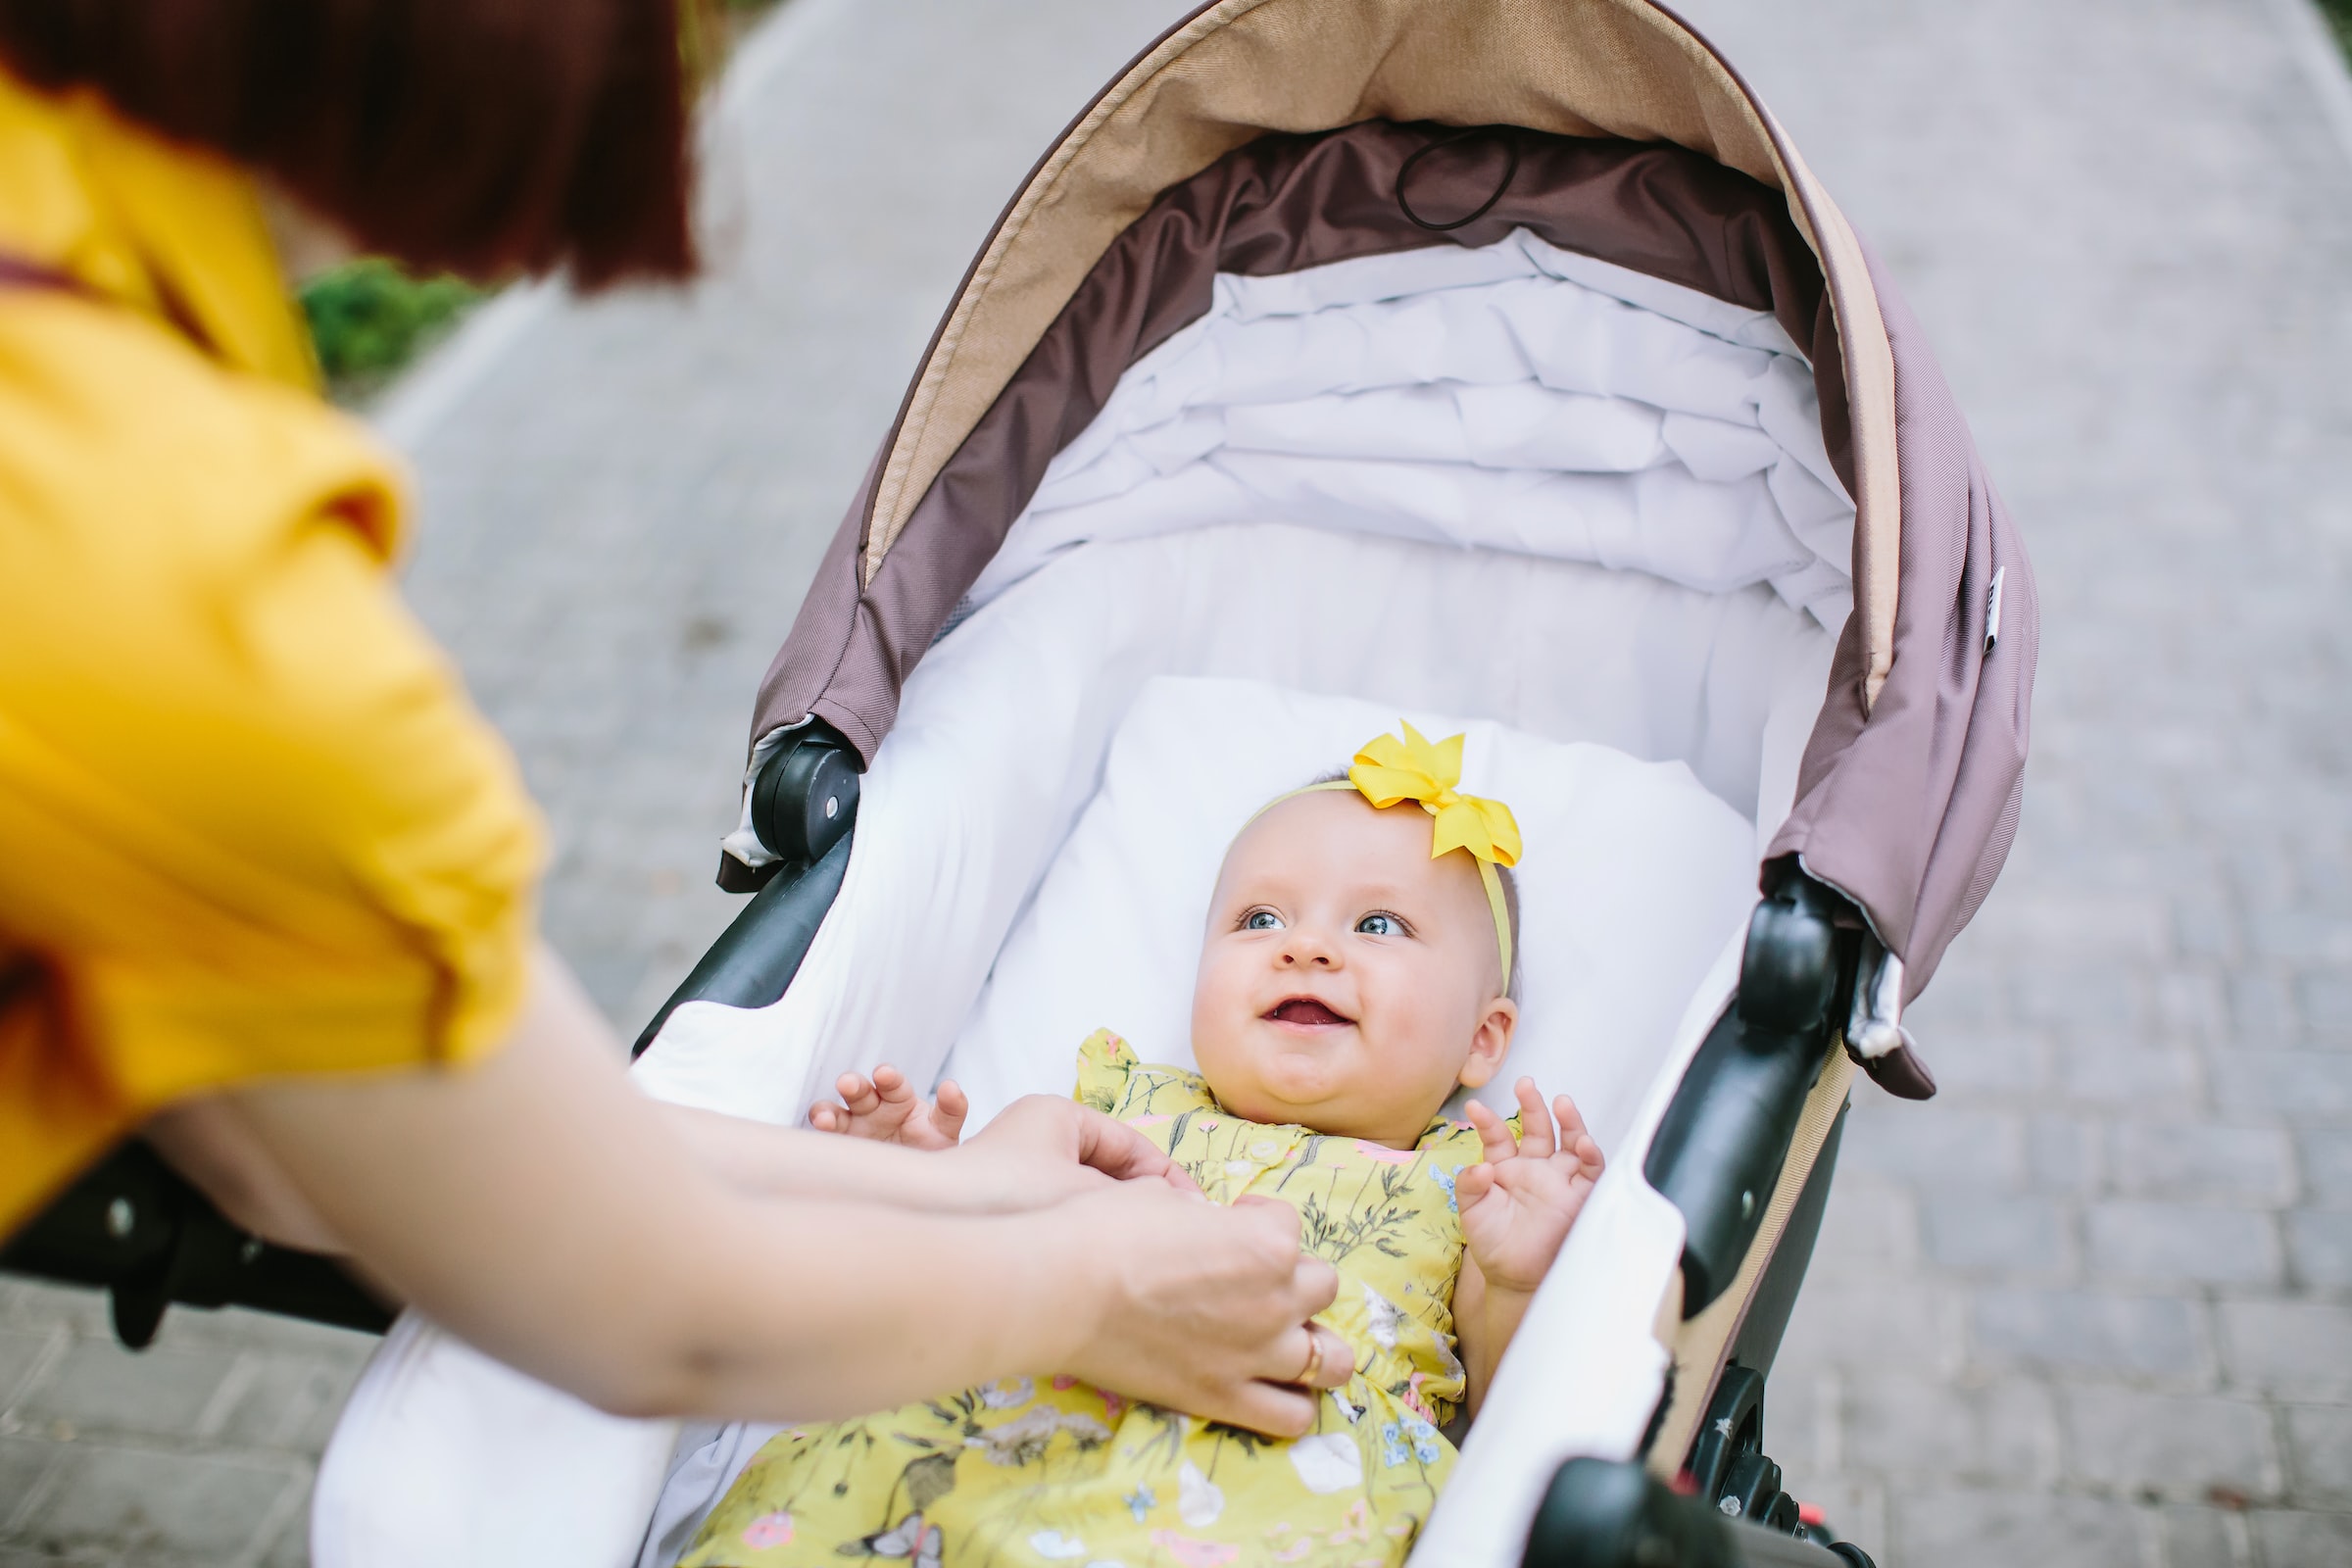 A baby smiles in a stroller